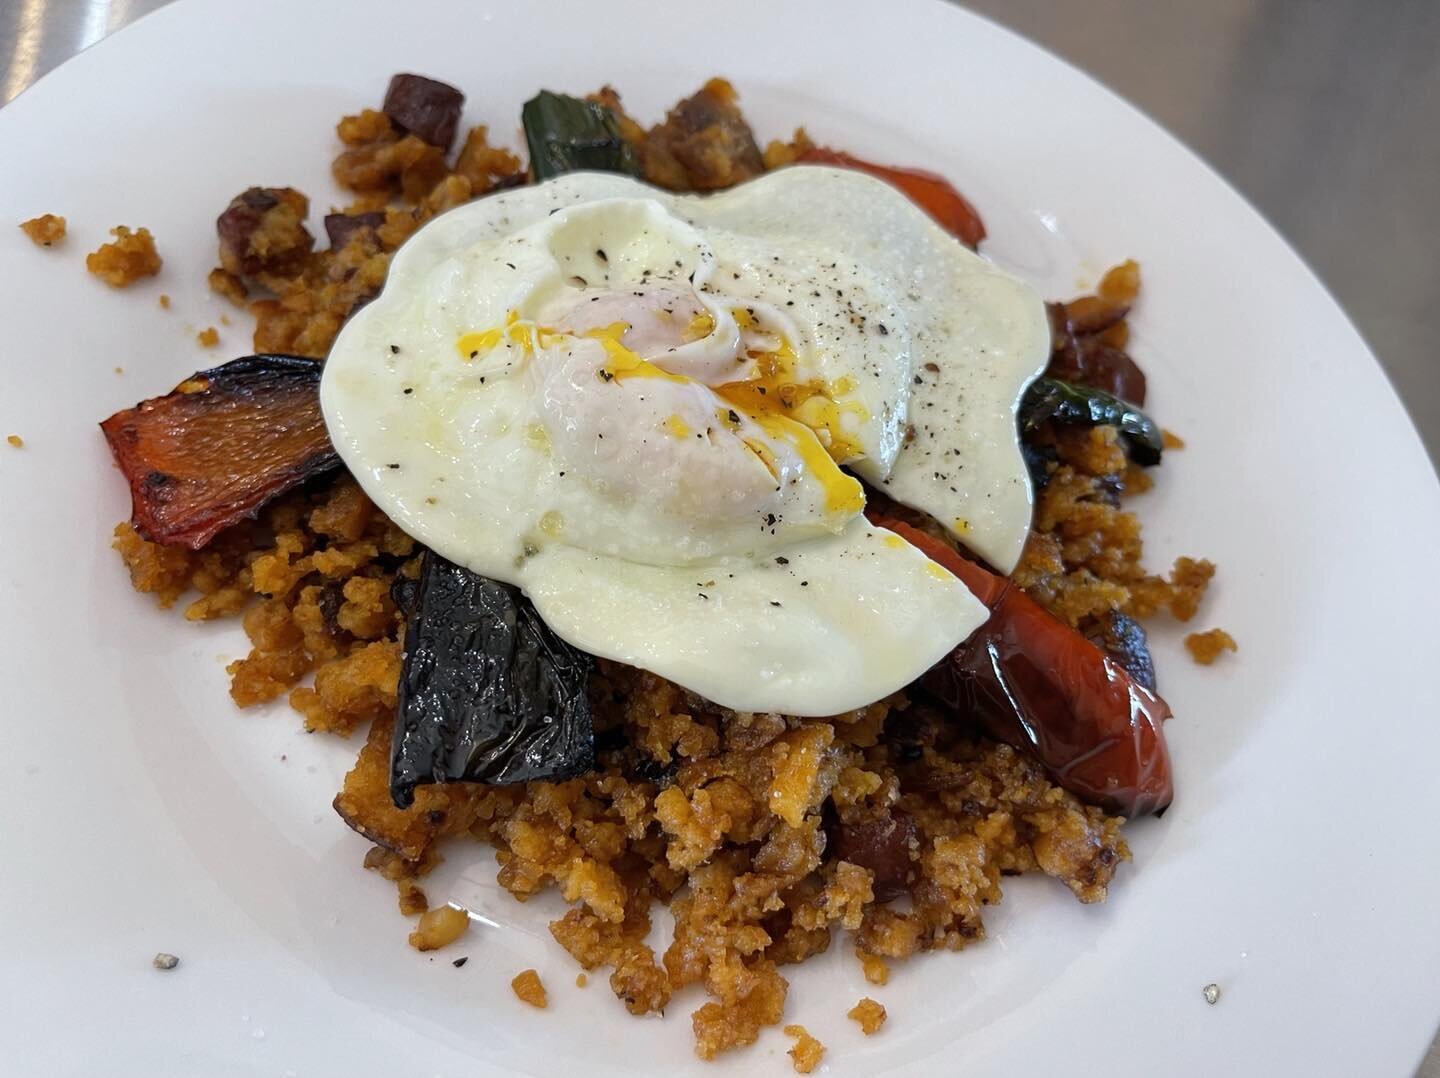 Made my mother&rsquo;s traditional spanish &ldquo;migas&rdquo; (from La Mancha in Spain) for brunch today! Migas with chorizo from Spain and fried peppers and egg. #smokedpaprika #chorizo #memoriesofspain